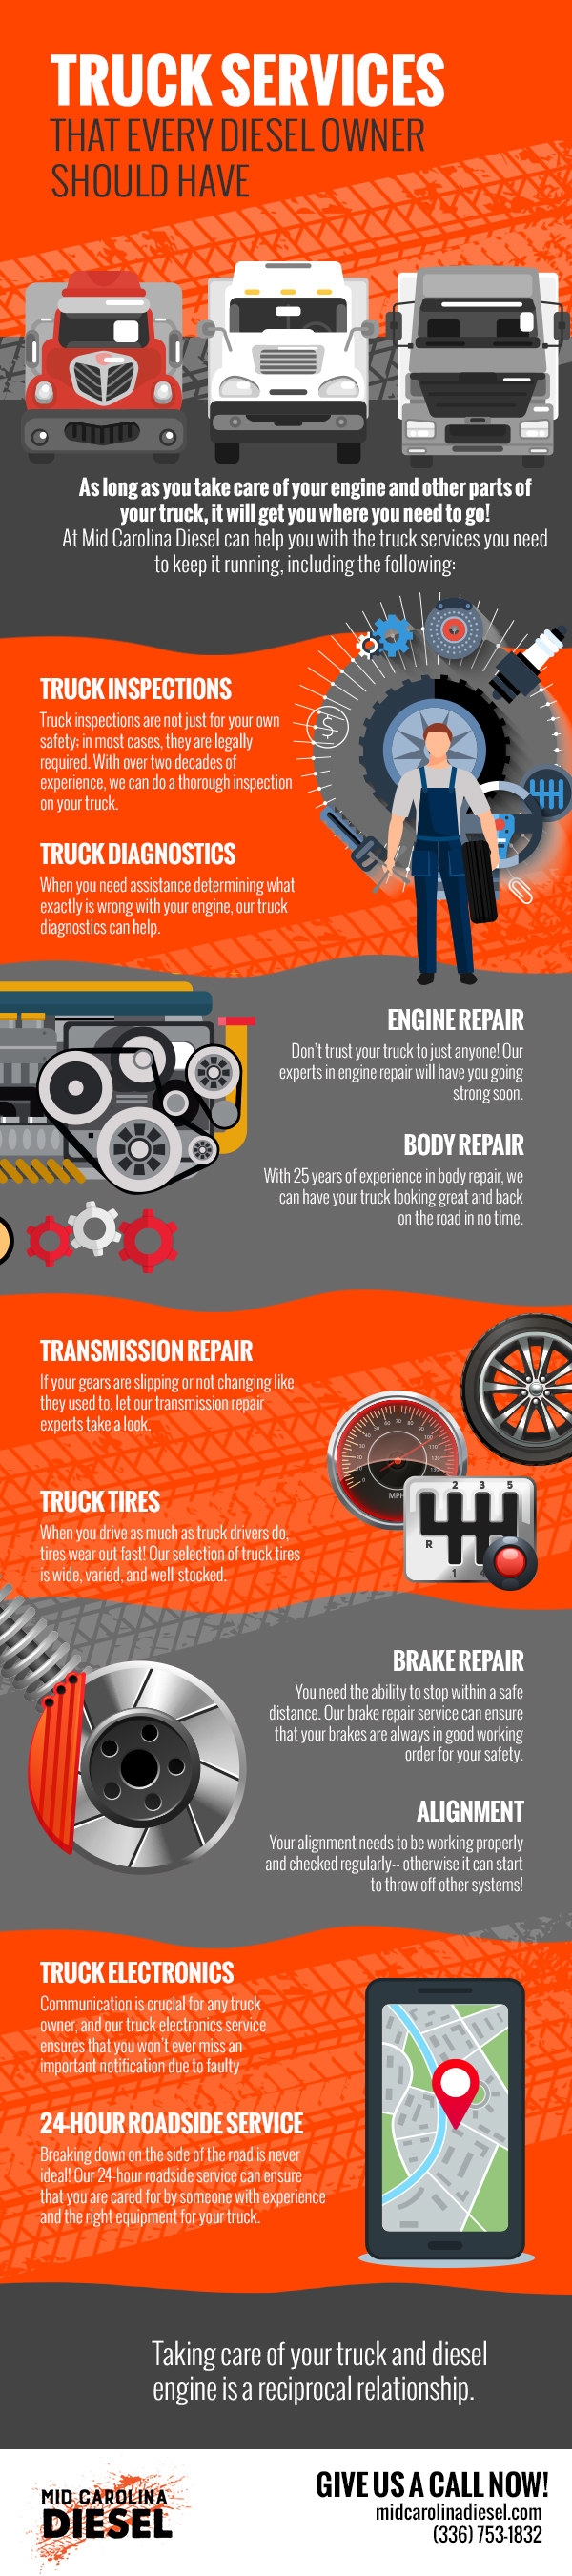 Truck Services That Every Diesel Owner Should Have [infographic]